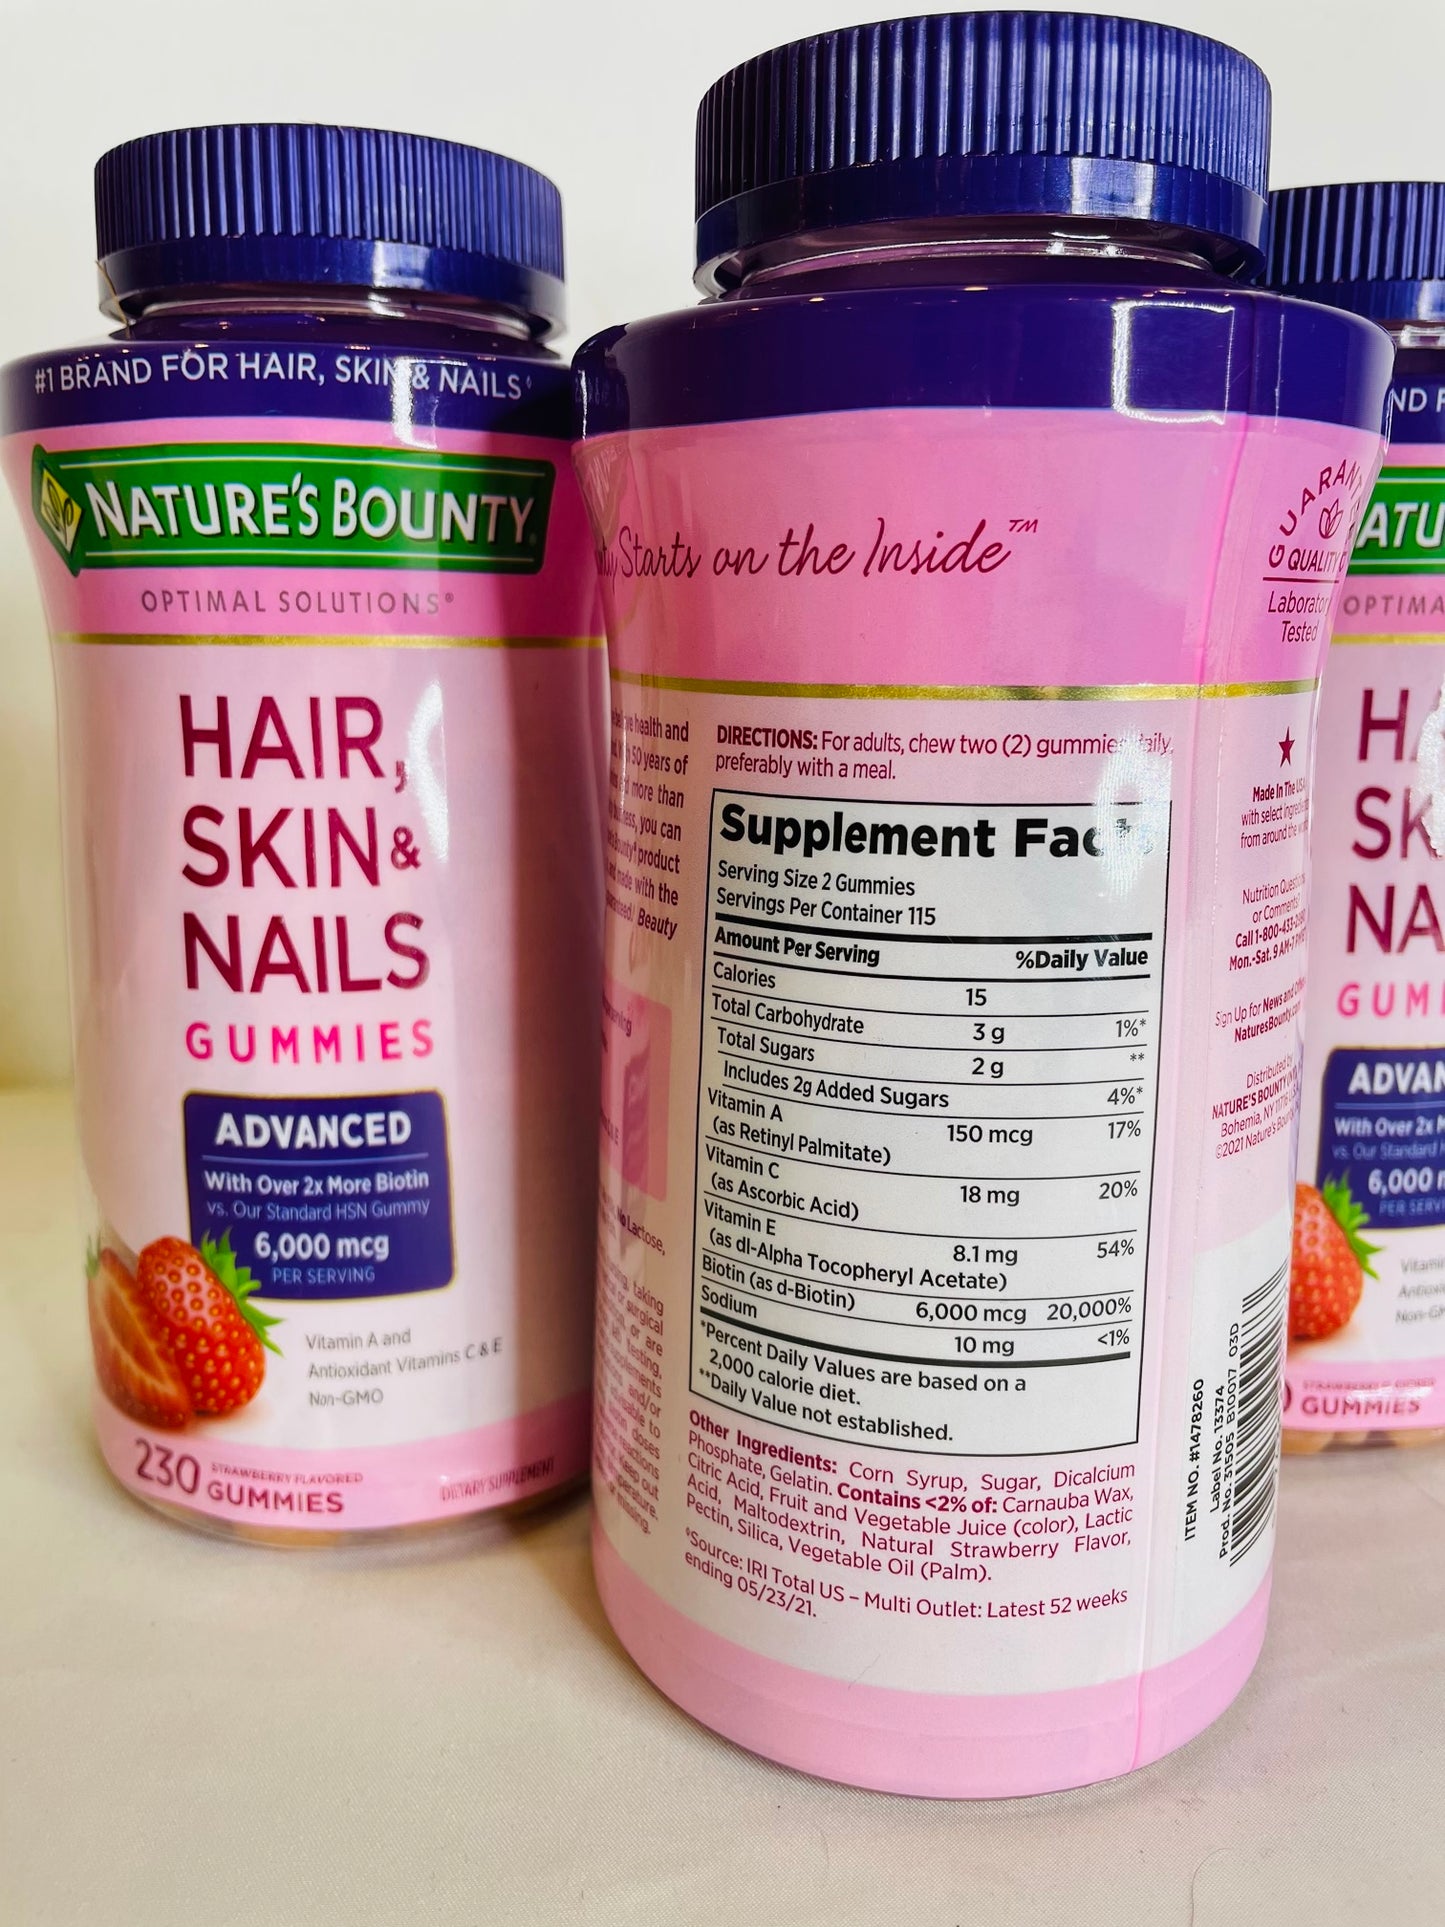 Natures bounty hair , skin and nails gummy